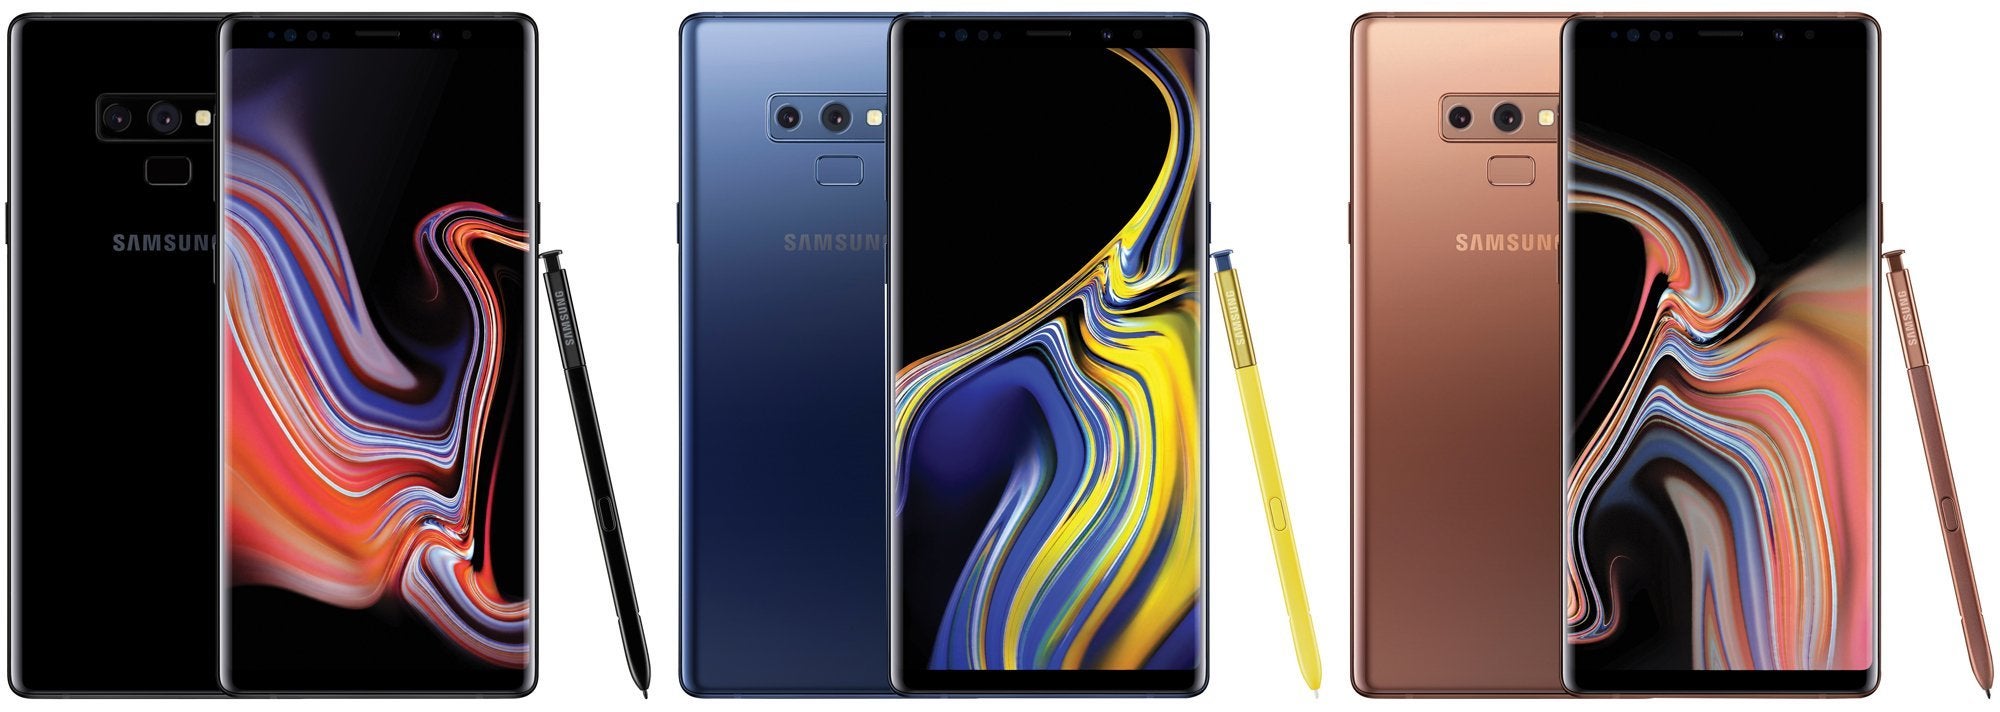 Galaxy Note 9 - Samsung Galaxy Note 9 "Crown" rumor review: Design, specs, camera, price & release date